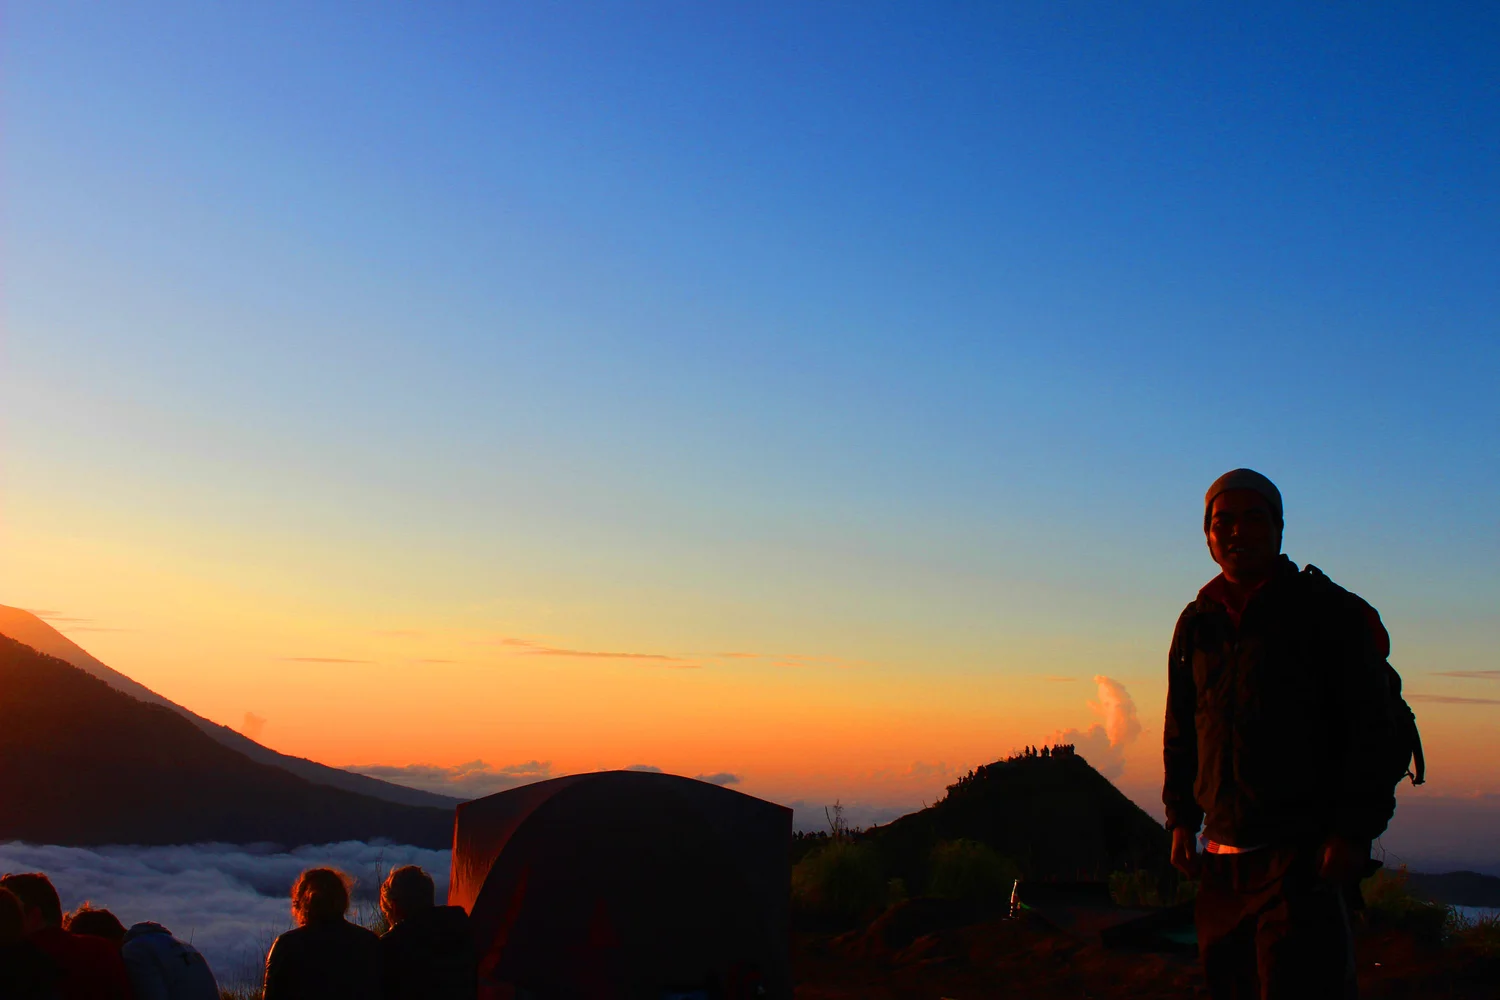 Camp Overnight atop Mt. Batur and see the Sunset & Sunrise